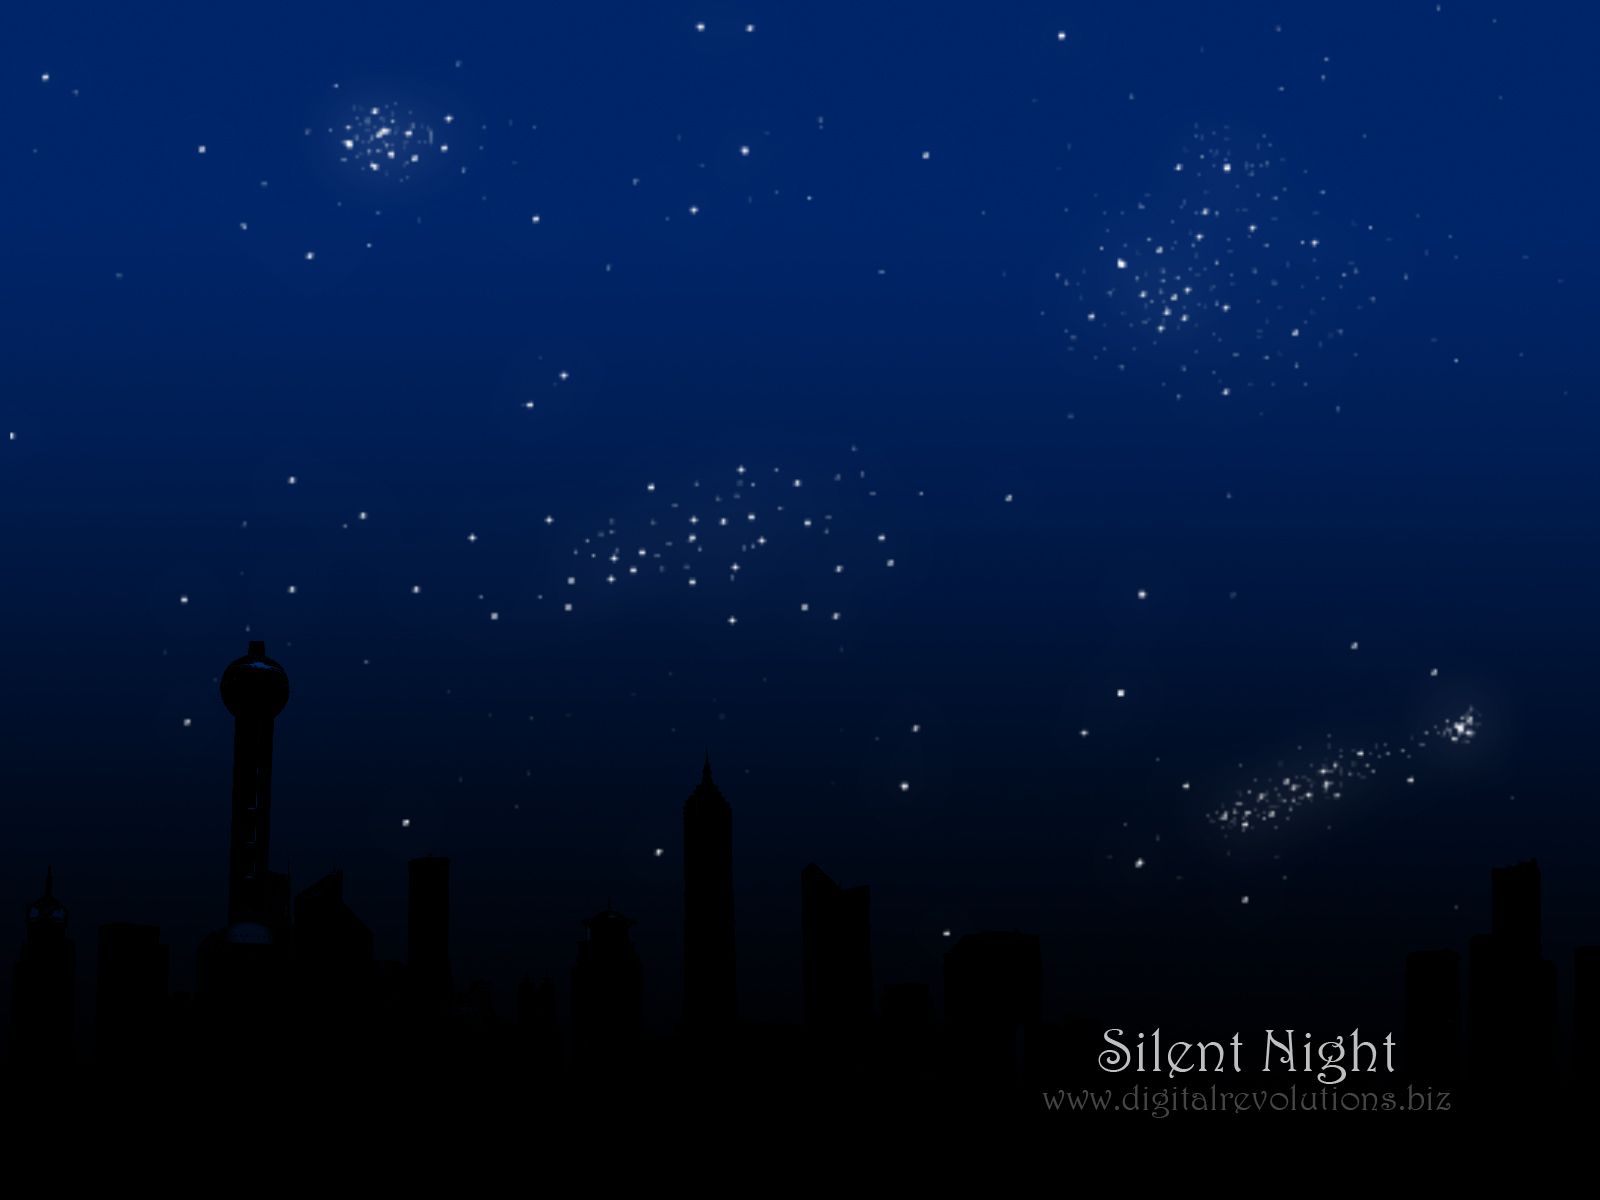 Silent Night PowerPoint Background. Silent Hill Wallpaper, Silent Night Wallpaper and Silent Movie Background